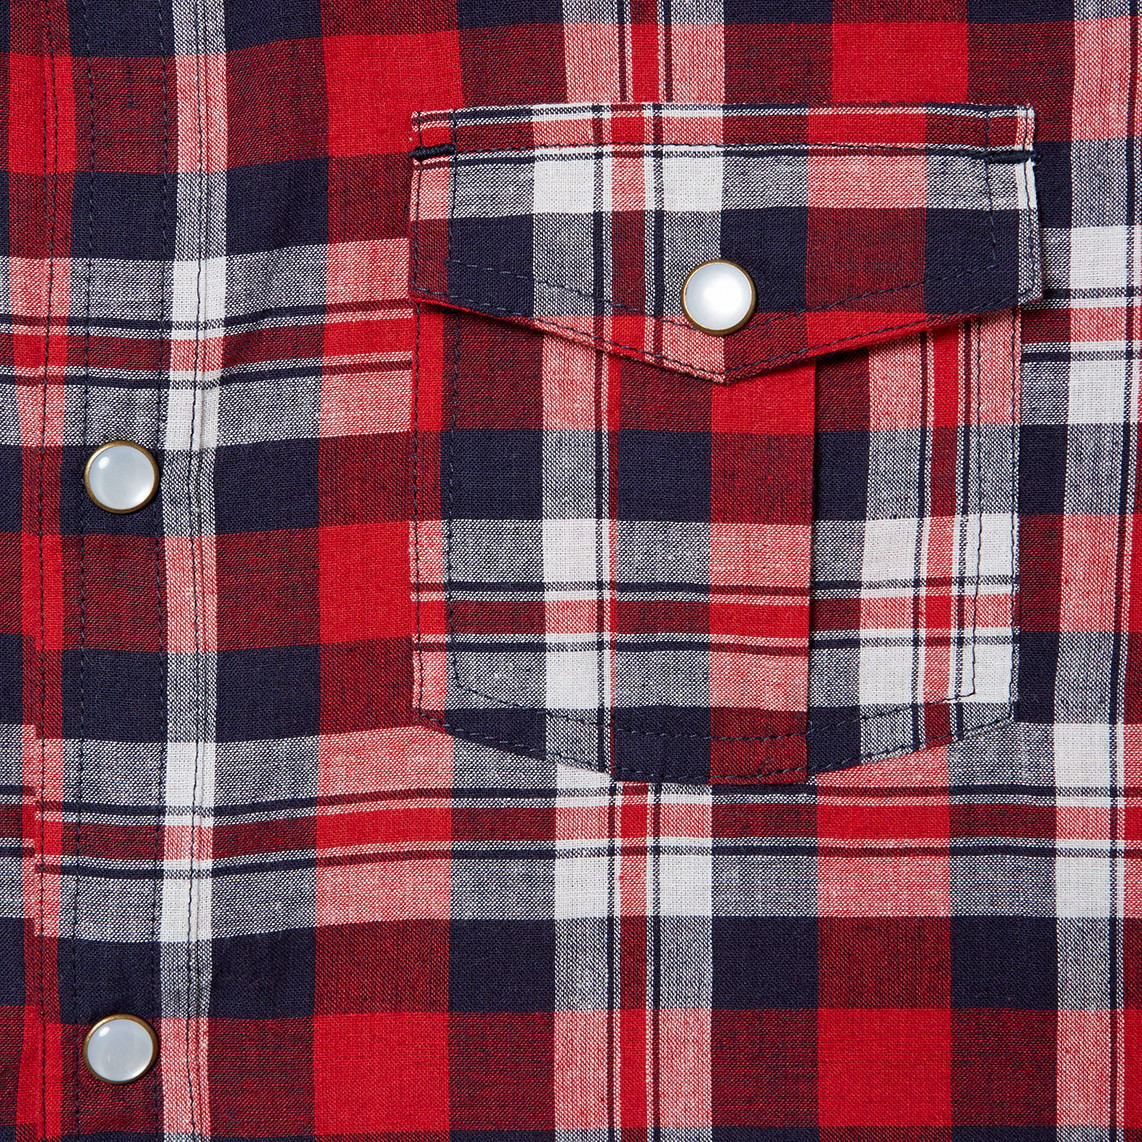 Red Plus size, Generous Fit, Check Shirt for Boys | 28-42 inch chest